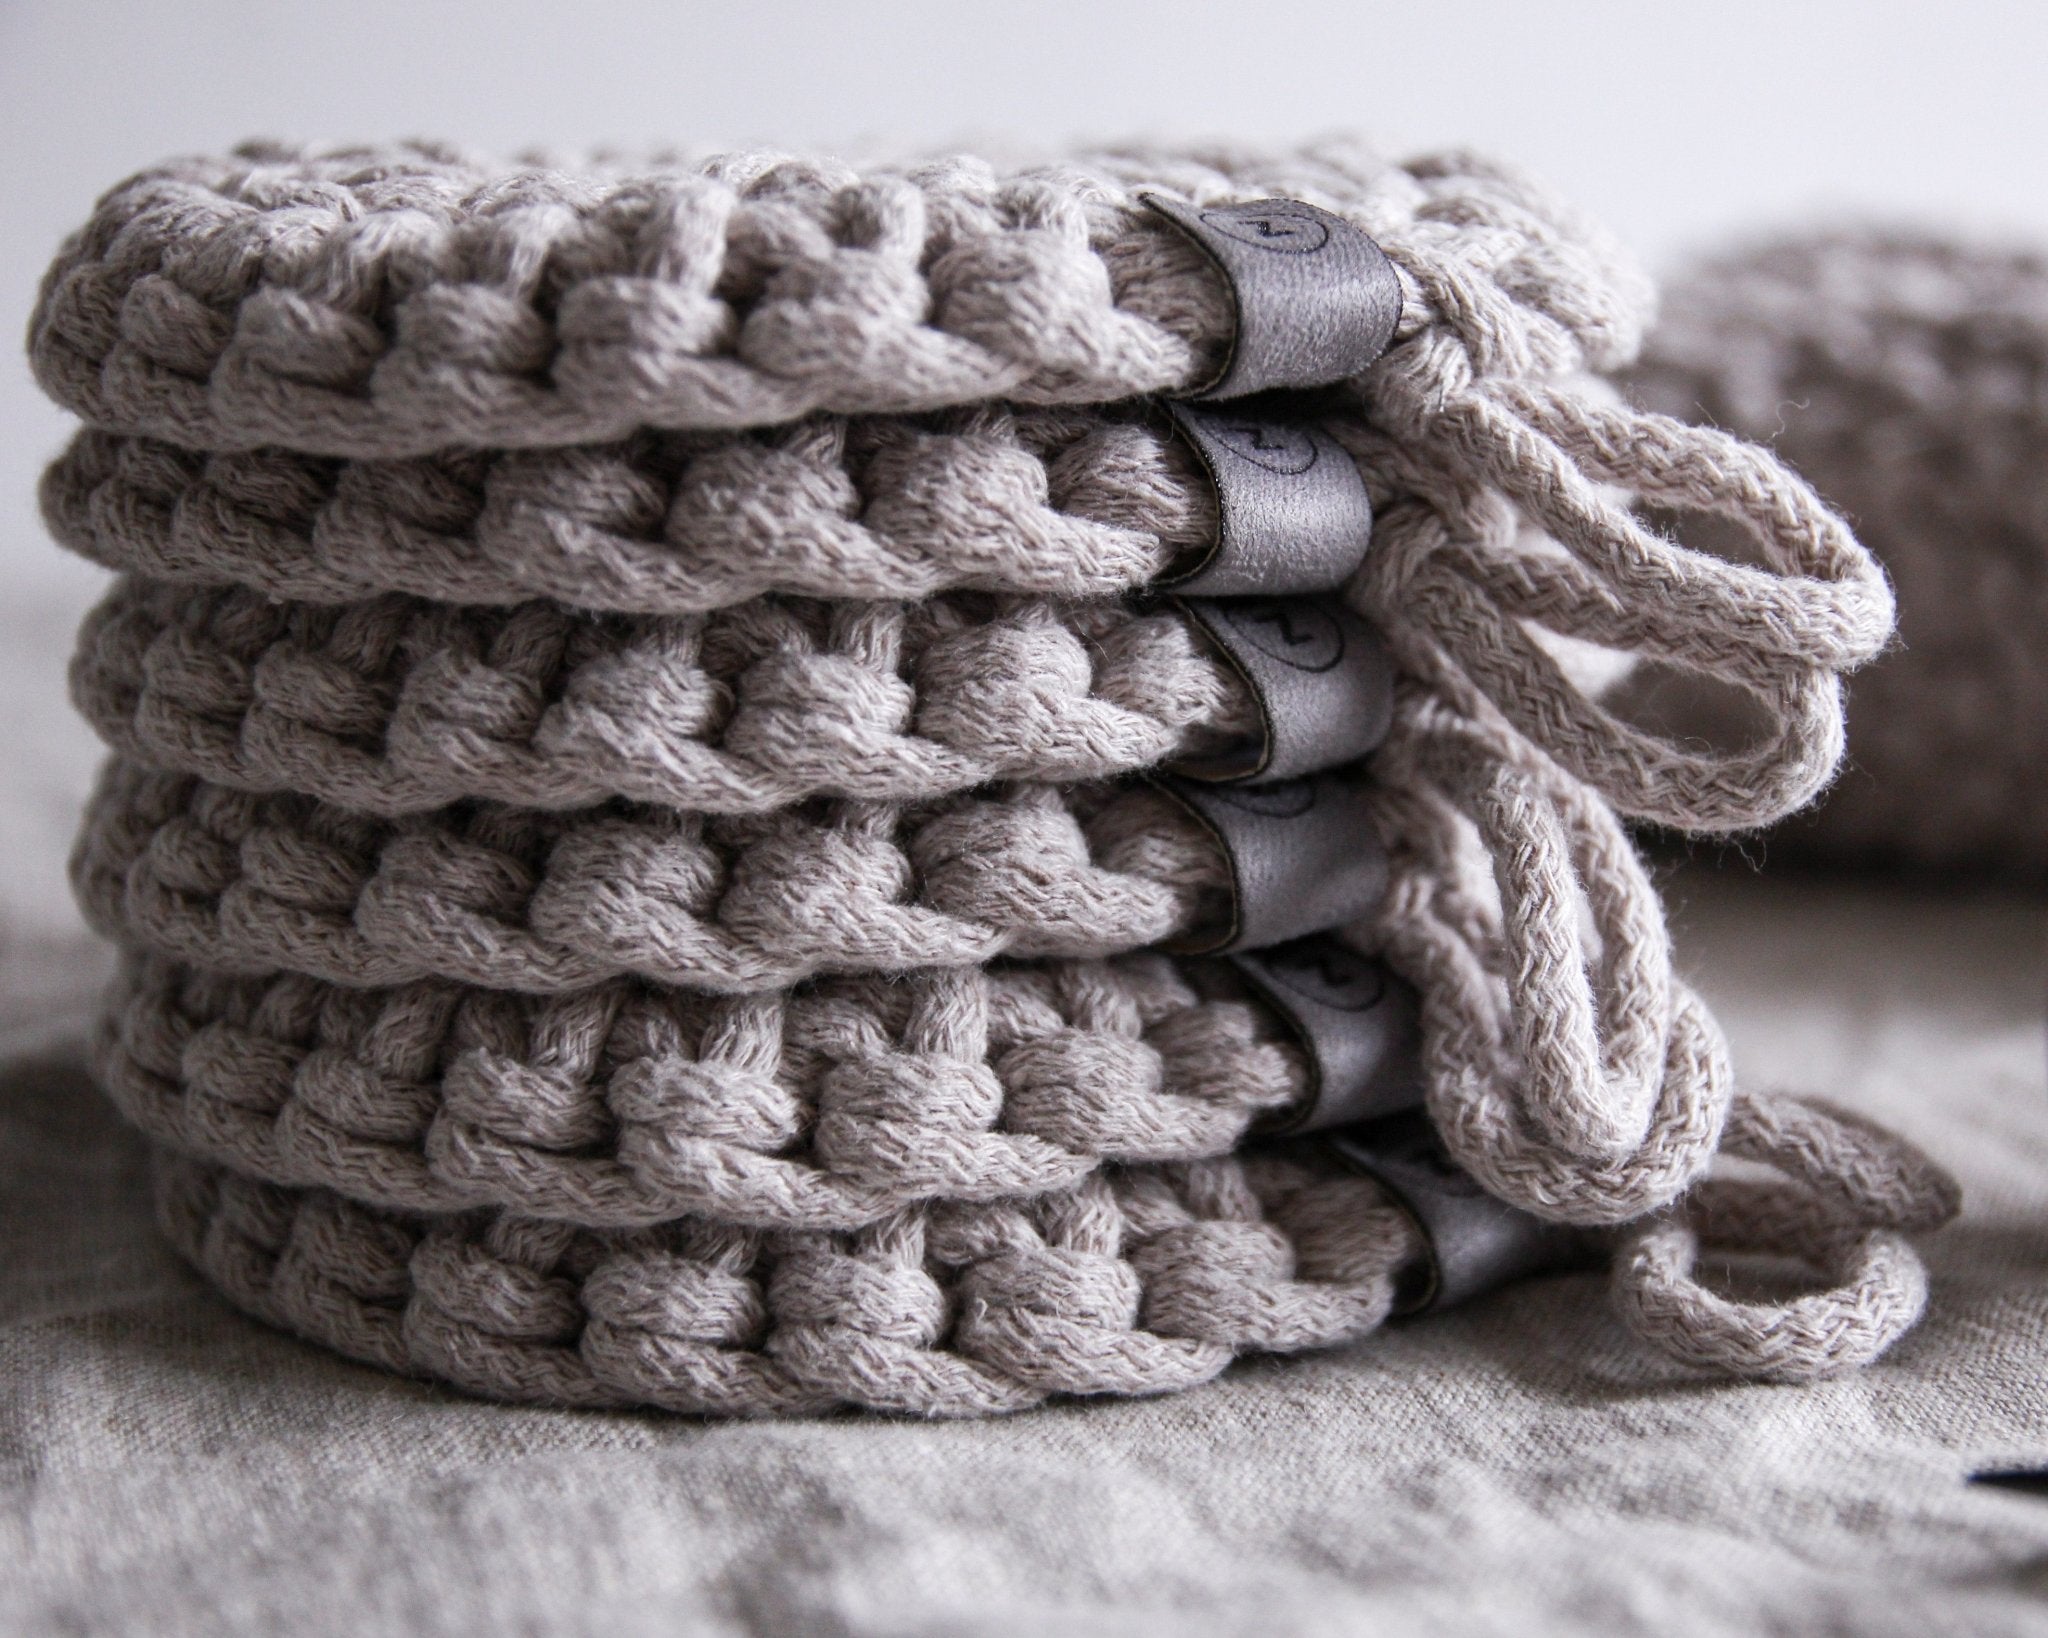 Handmade Knitted Pouffe & Crocheted Nordic Accessories - Zuri House